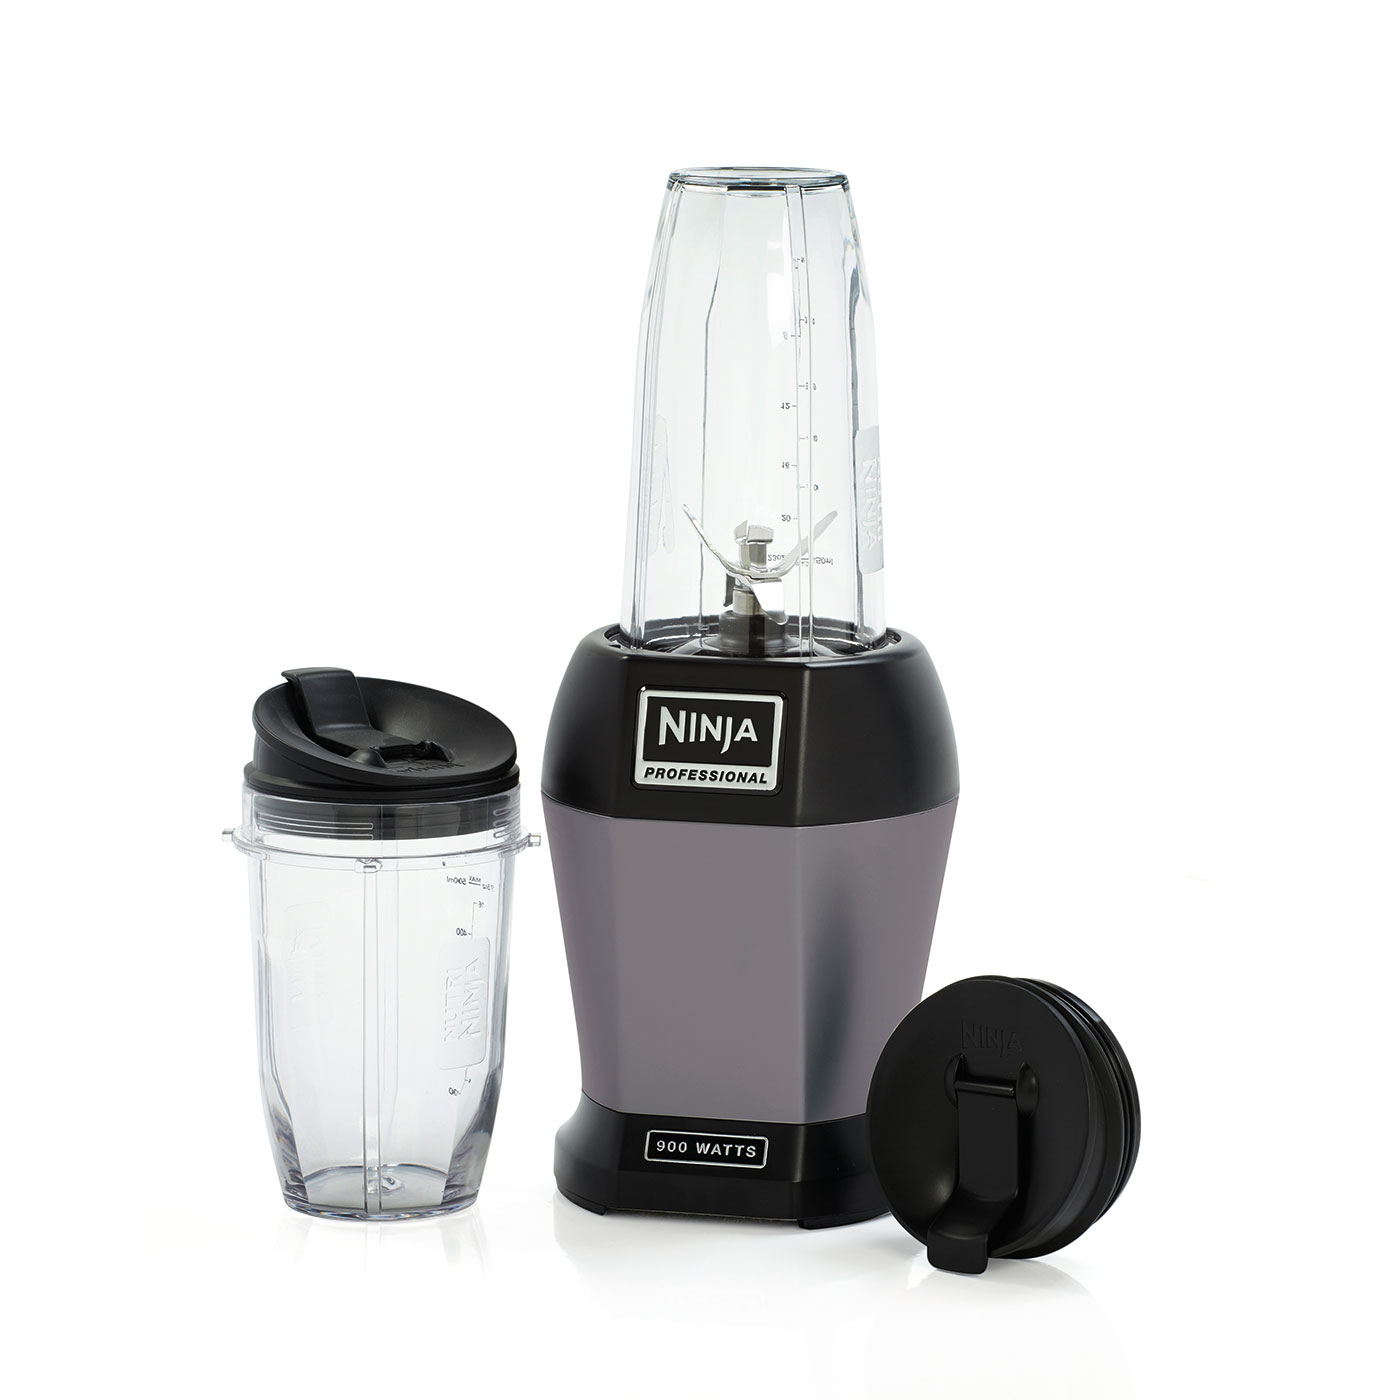 Quirky Queen Reviews: Nutri Ninja Personal Blender BL450 Review